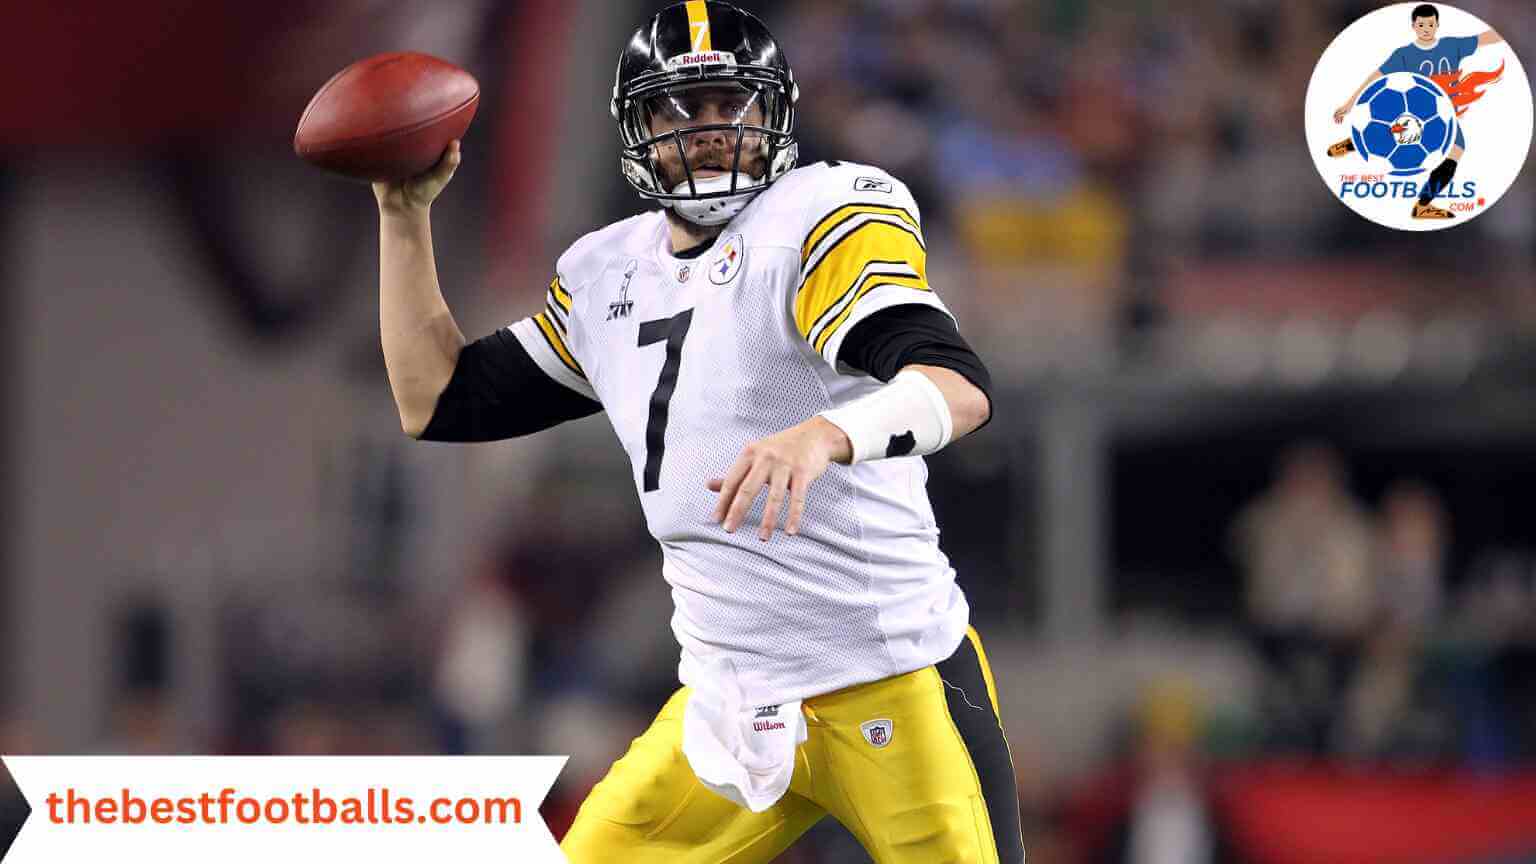 Ben Roethlisberger’s Most Memorable Plays That Left a Mark on Football History